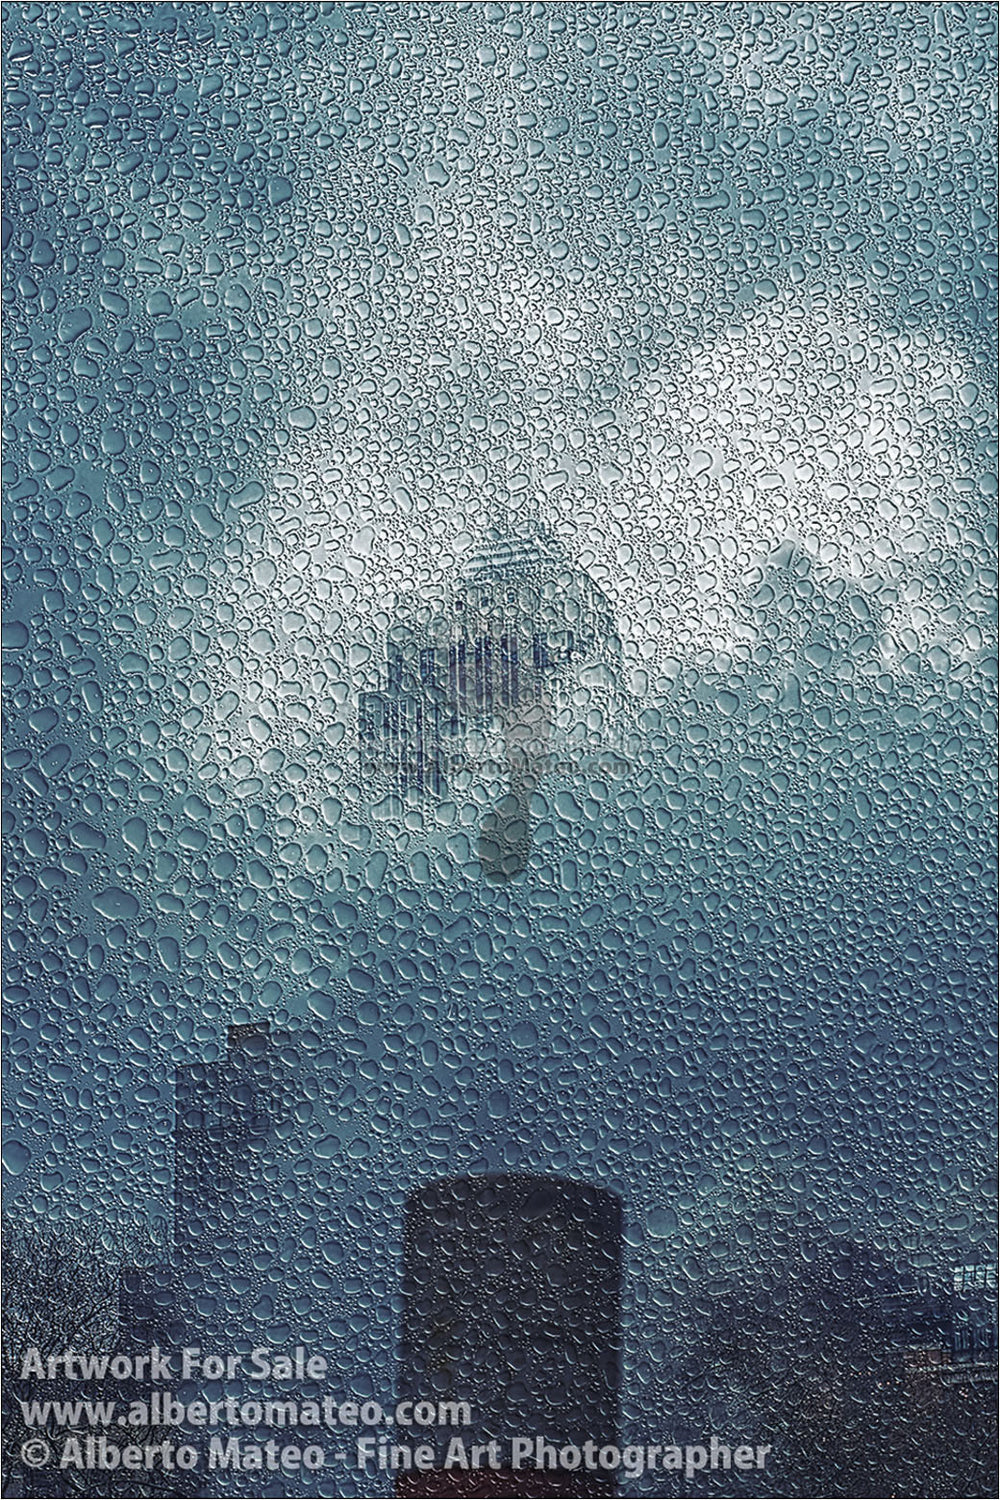 Empire State under the Rain, New York. [3/3] | Full view of the Print.